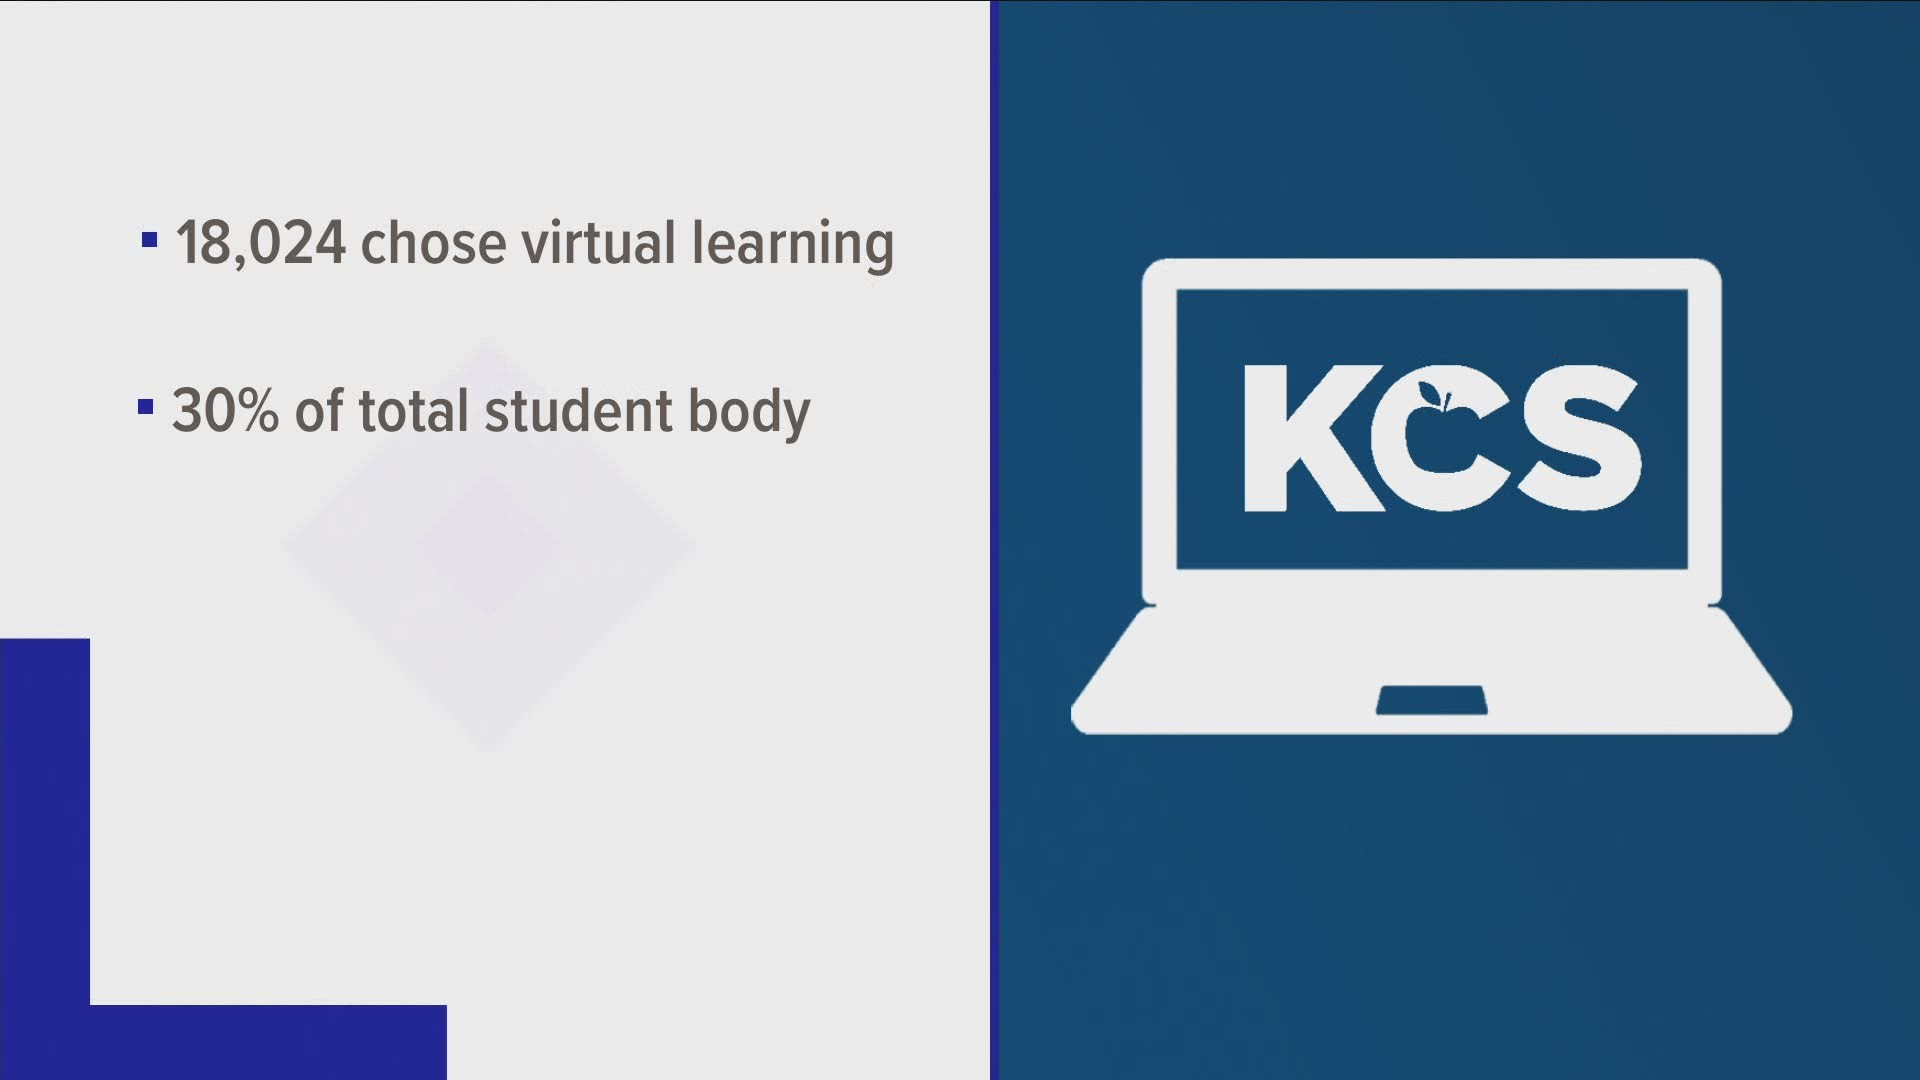 It said more than 18,000 students chose the virtual option for the school year.